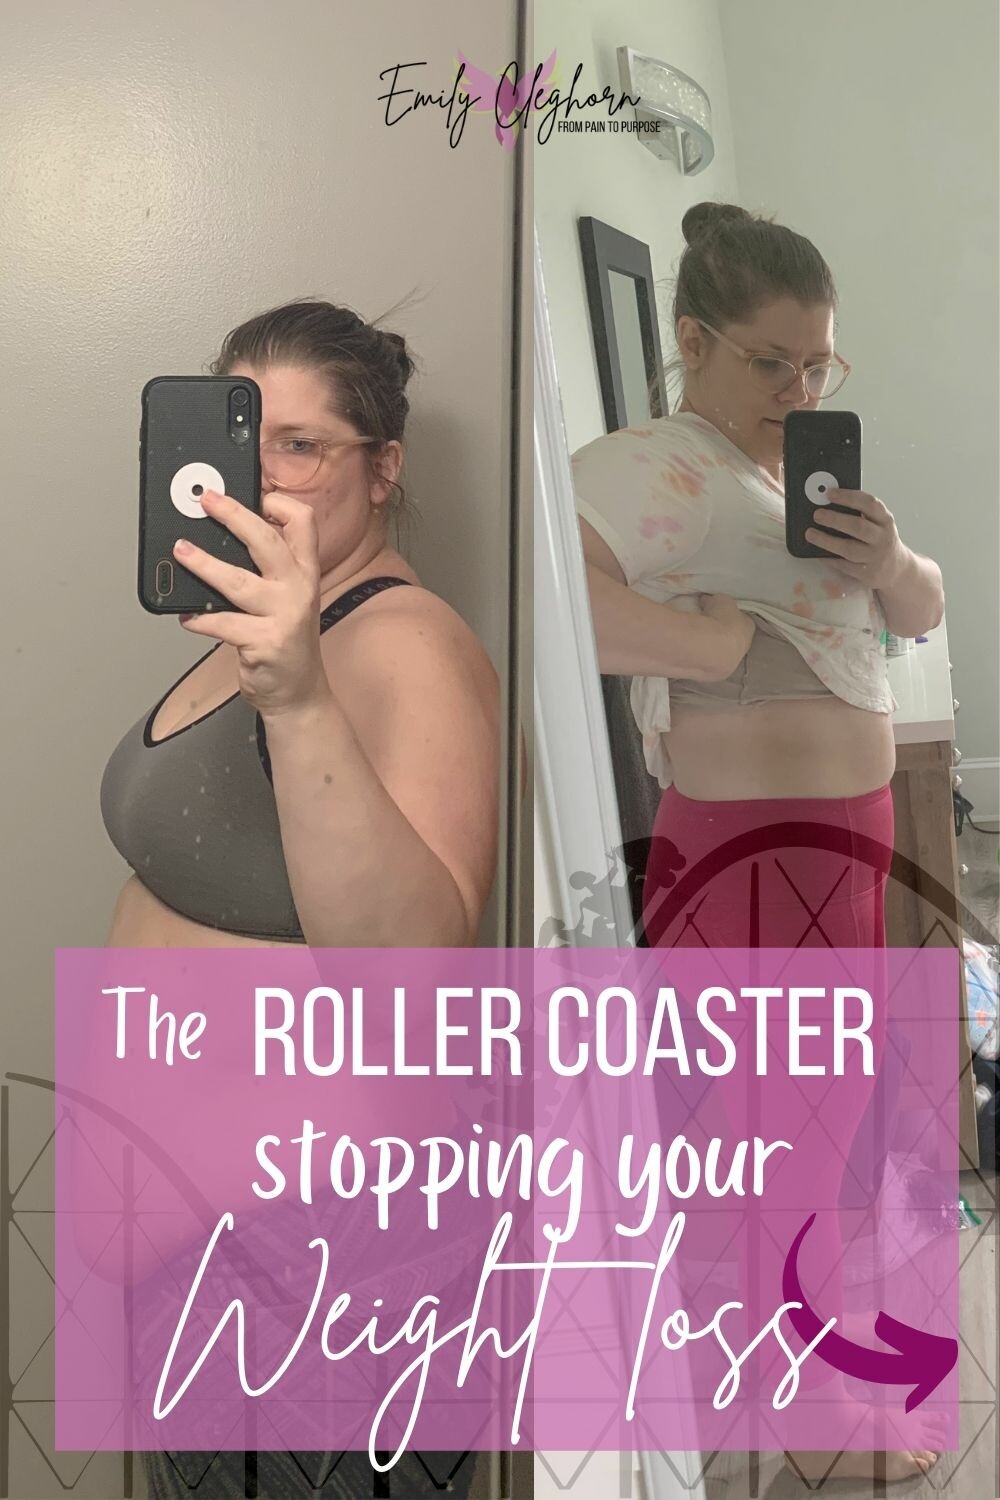 The Rollercoaster STOPPING your Weight loss